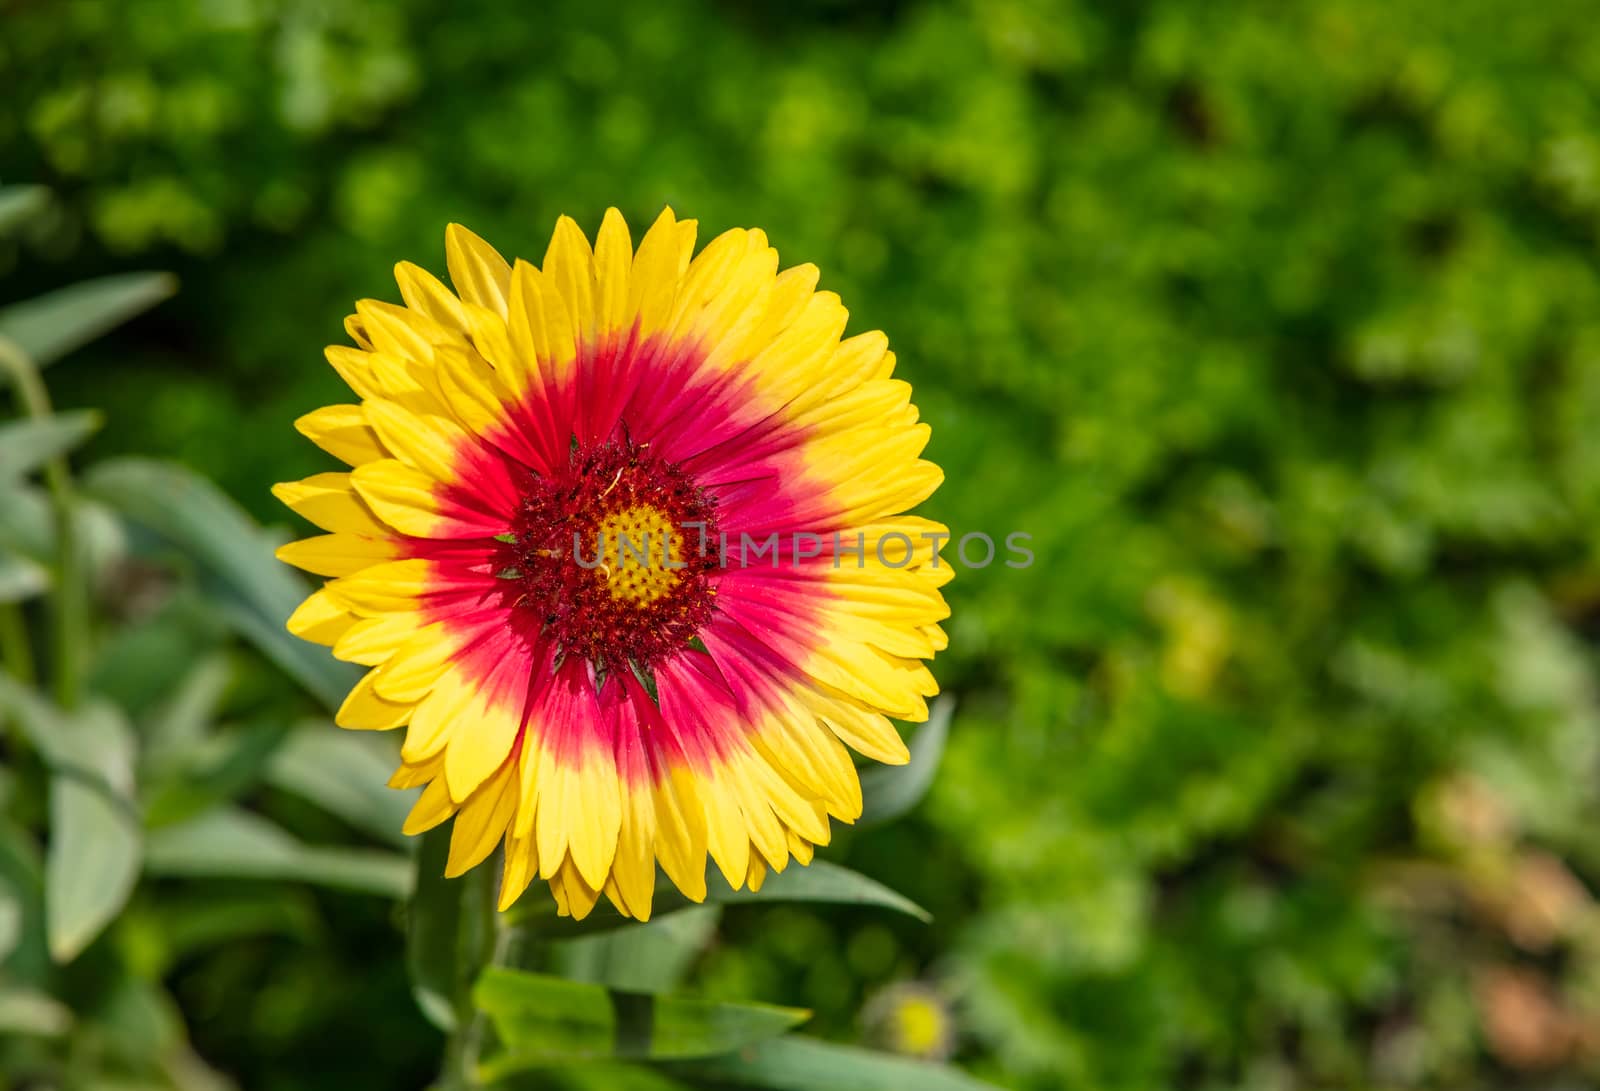 Close up shot of a beautiful yellow flower with a red center in the meadow on a sunny day. Blurred green background. Copy space.